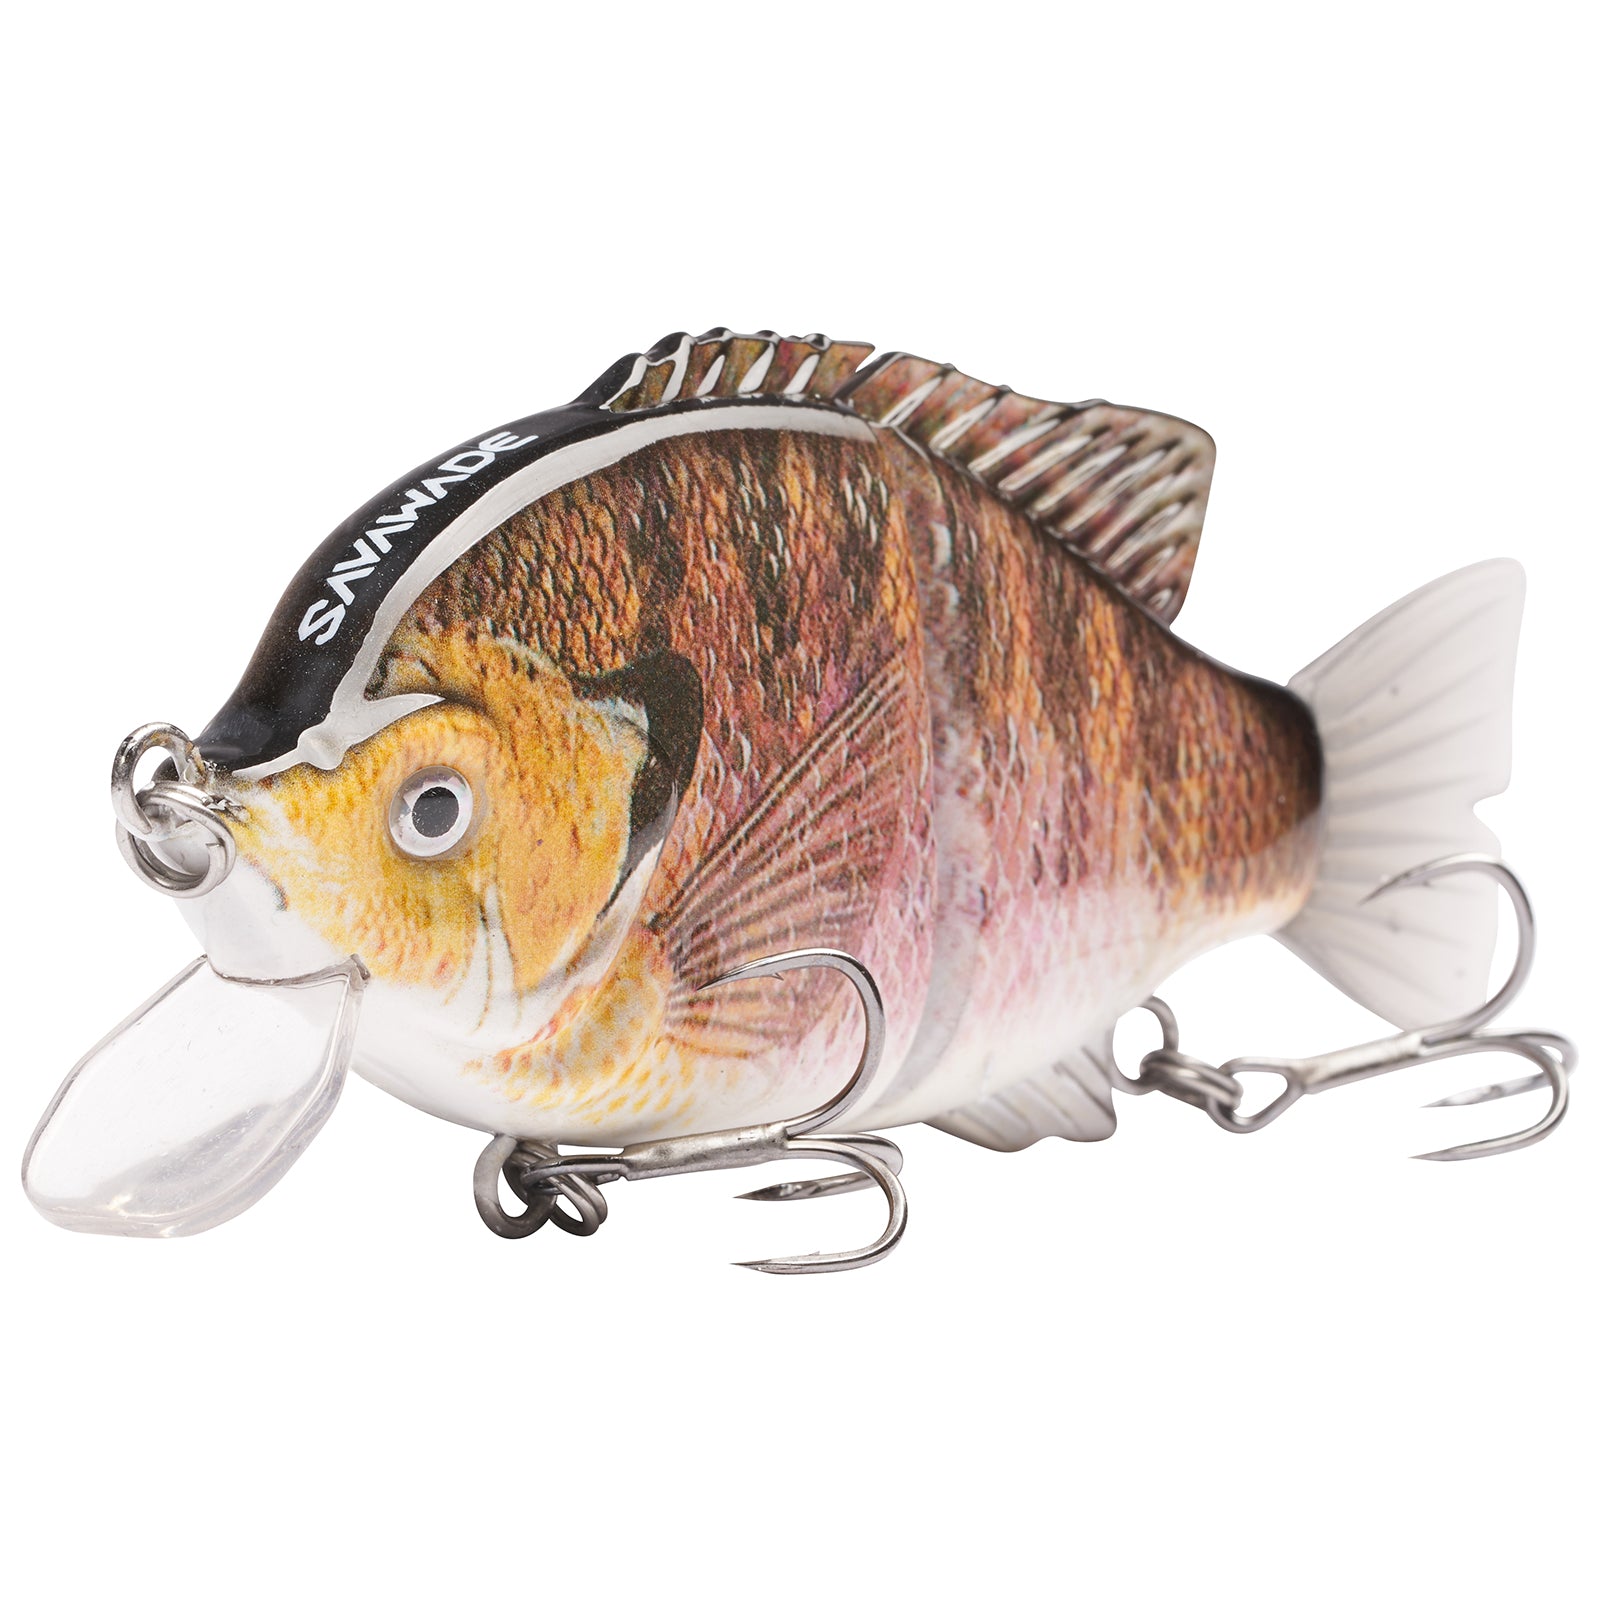 Craw Fishing Lures for Speckled Trout, Redfish, Bass - Louisiana Paddle  Tail Swimbaits for Freshwater and Saltwater